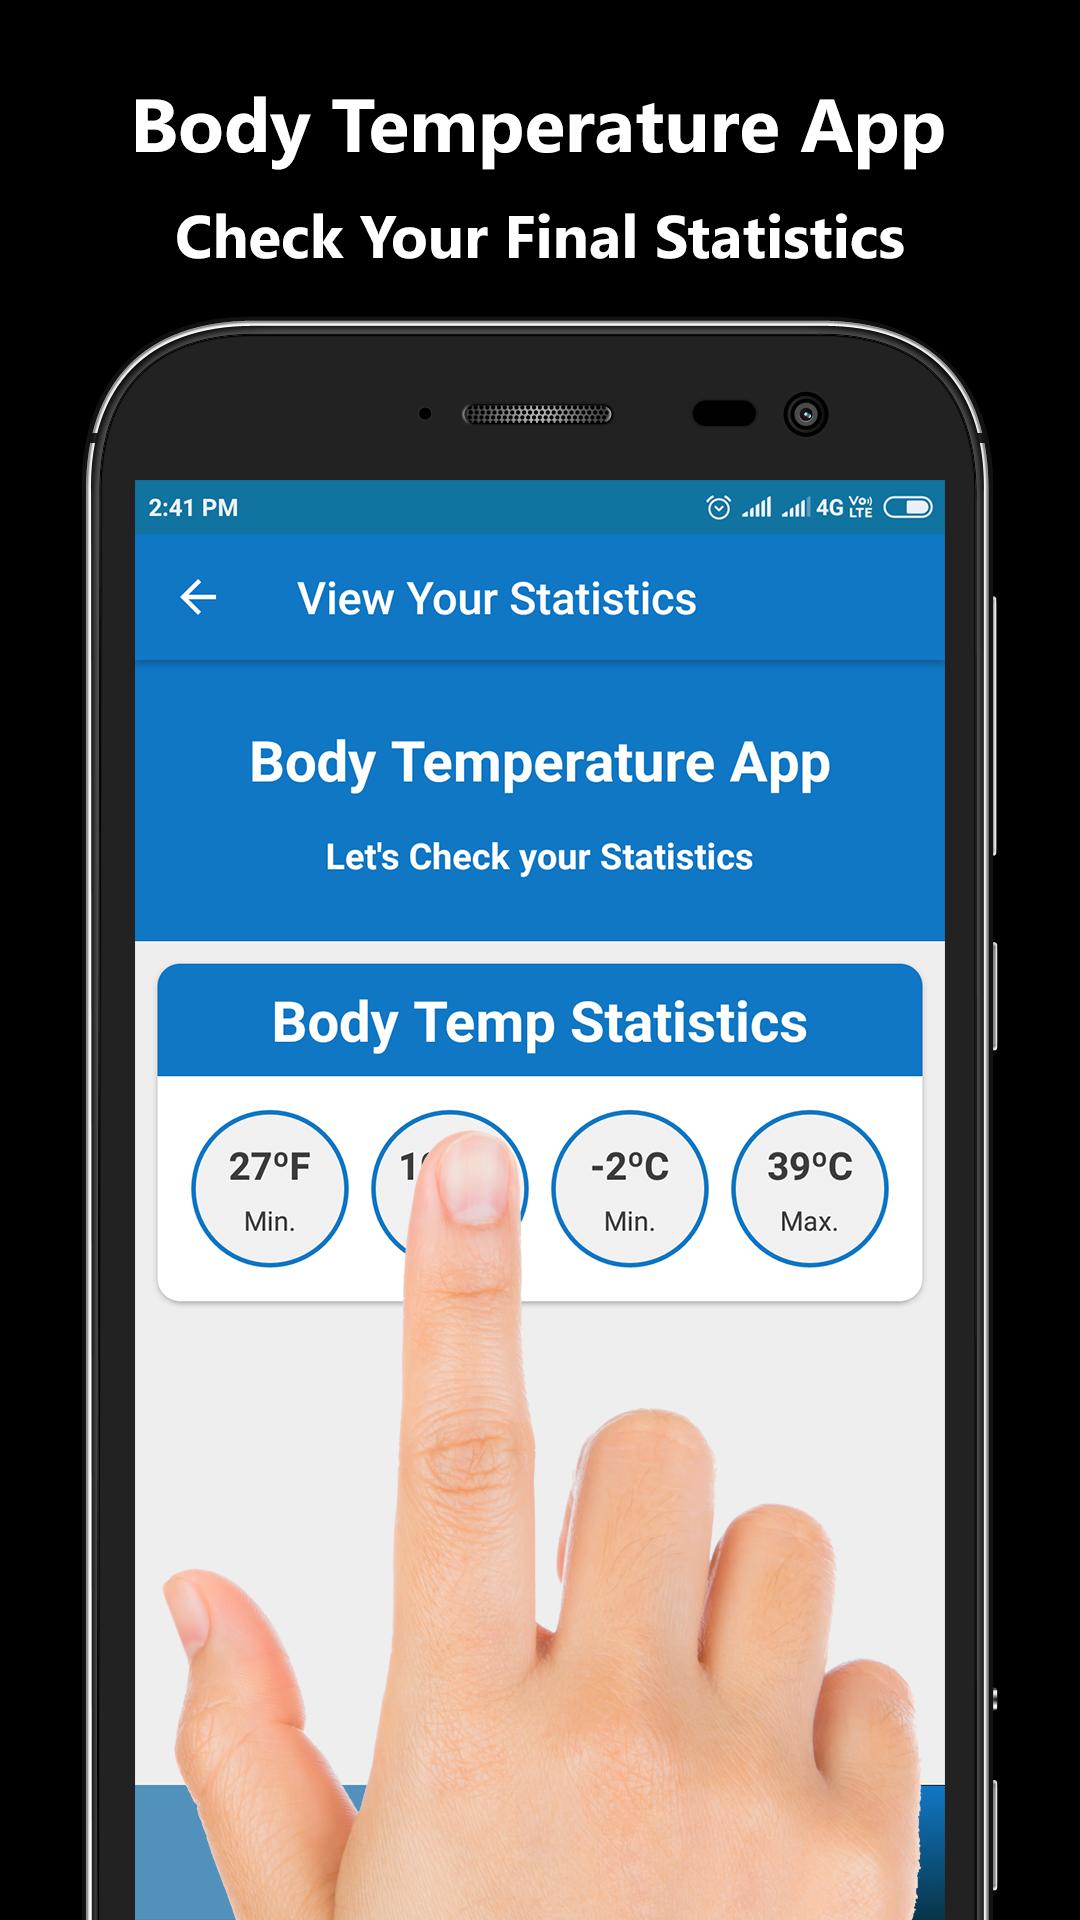 15 Best Images Take My Temperature App : Staffany Develops Mobile App Cico Global To Help Regional Businesses Reopen Safely And Efficiently Pr Newswire Apac